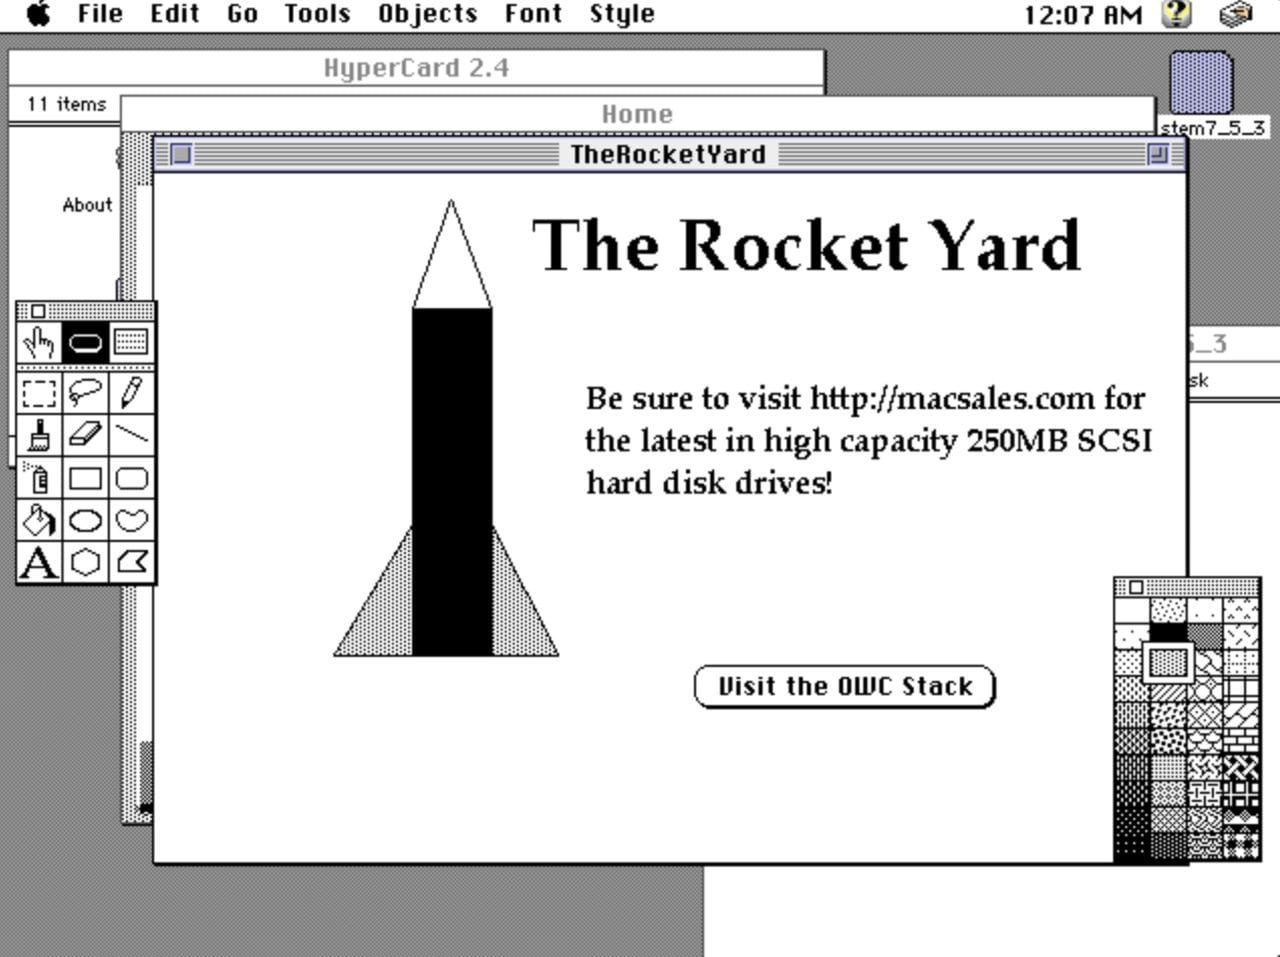 Imagining The Rocket Yard and MacSales.com as a HyperCard stack...